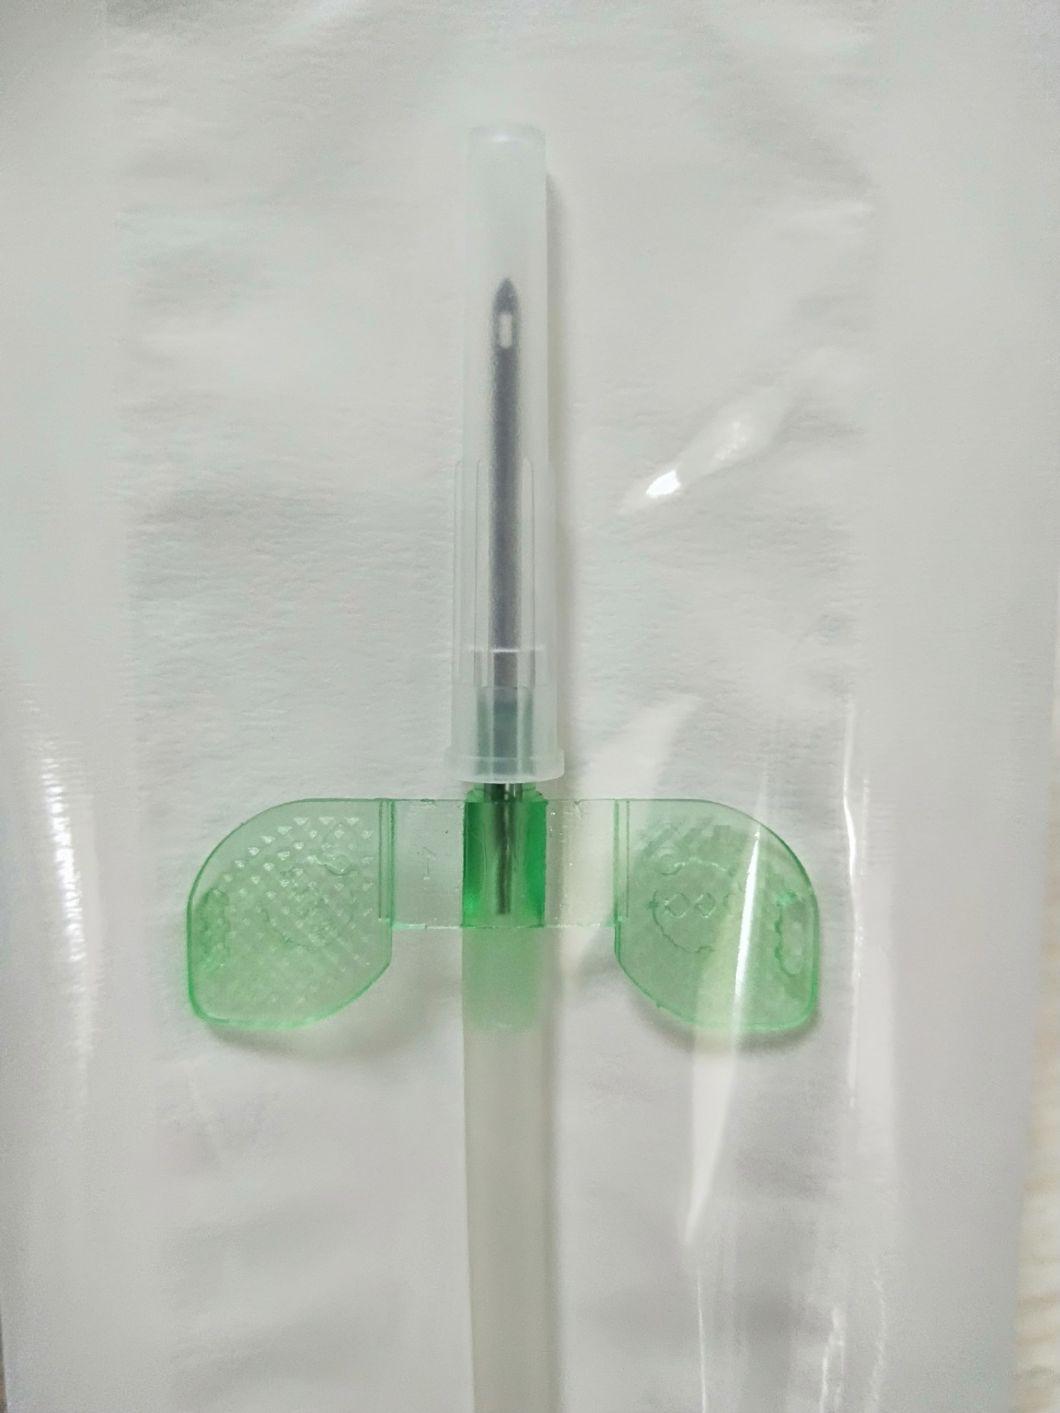 Medical 18g 21g 22g 23G 25g Sample Vacuum Blood Collection Draw Butterfly Needles of Types